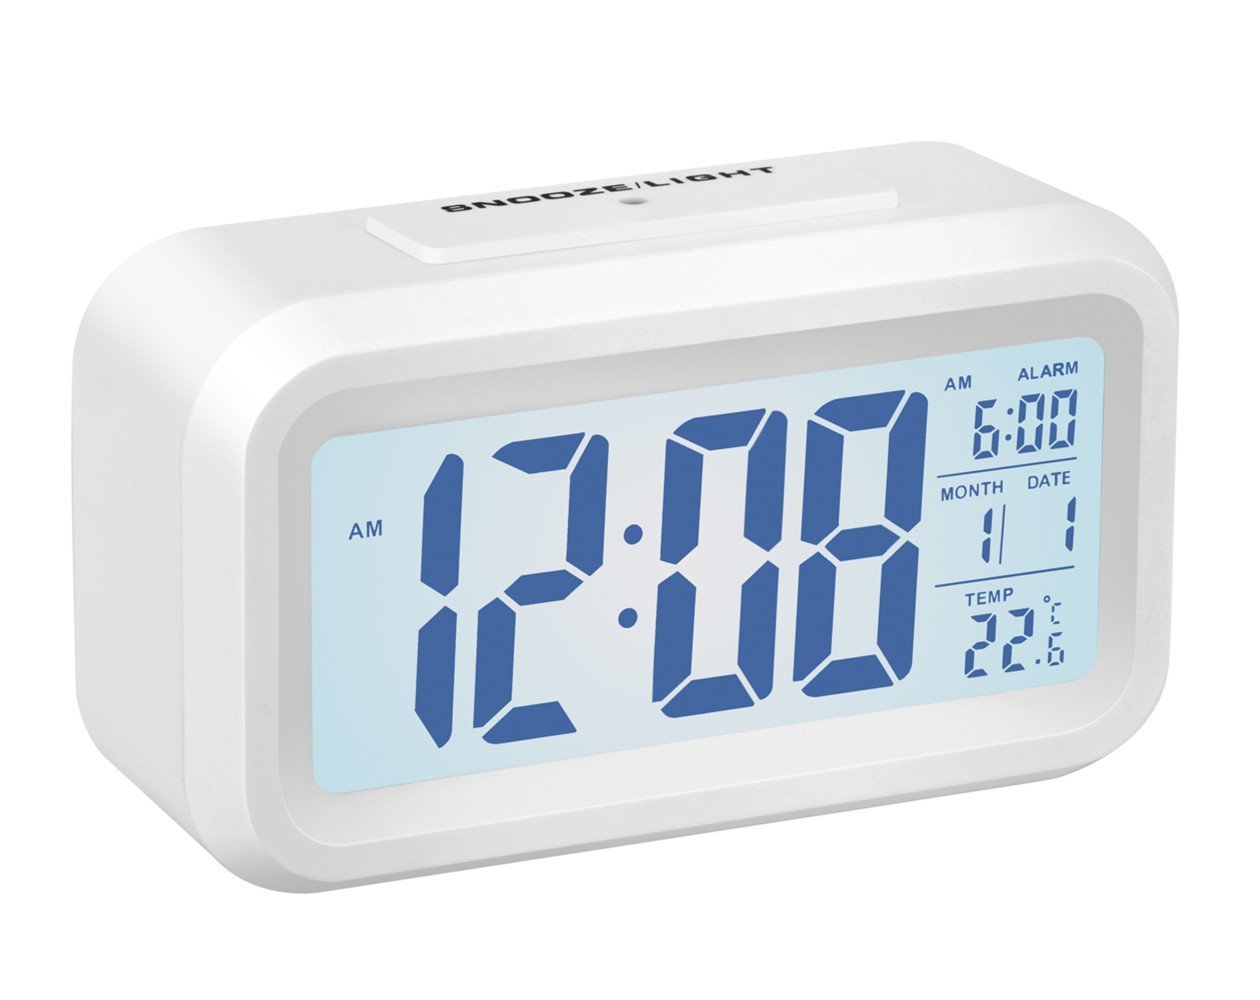 Alarm Clock,Gabone Battery Operated with Large Lcd Display Temperature Display Nightlight and Snooze Smart Backlight Digital Alarm Clock (White)